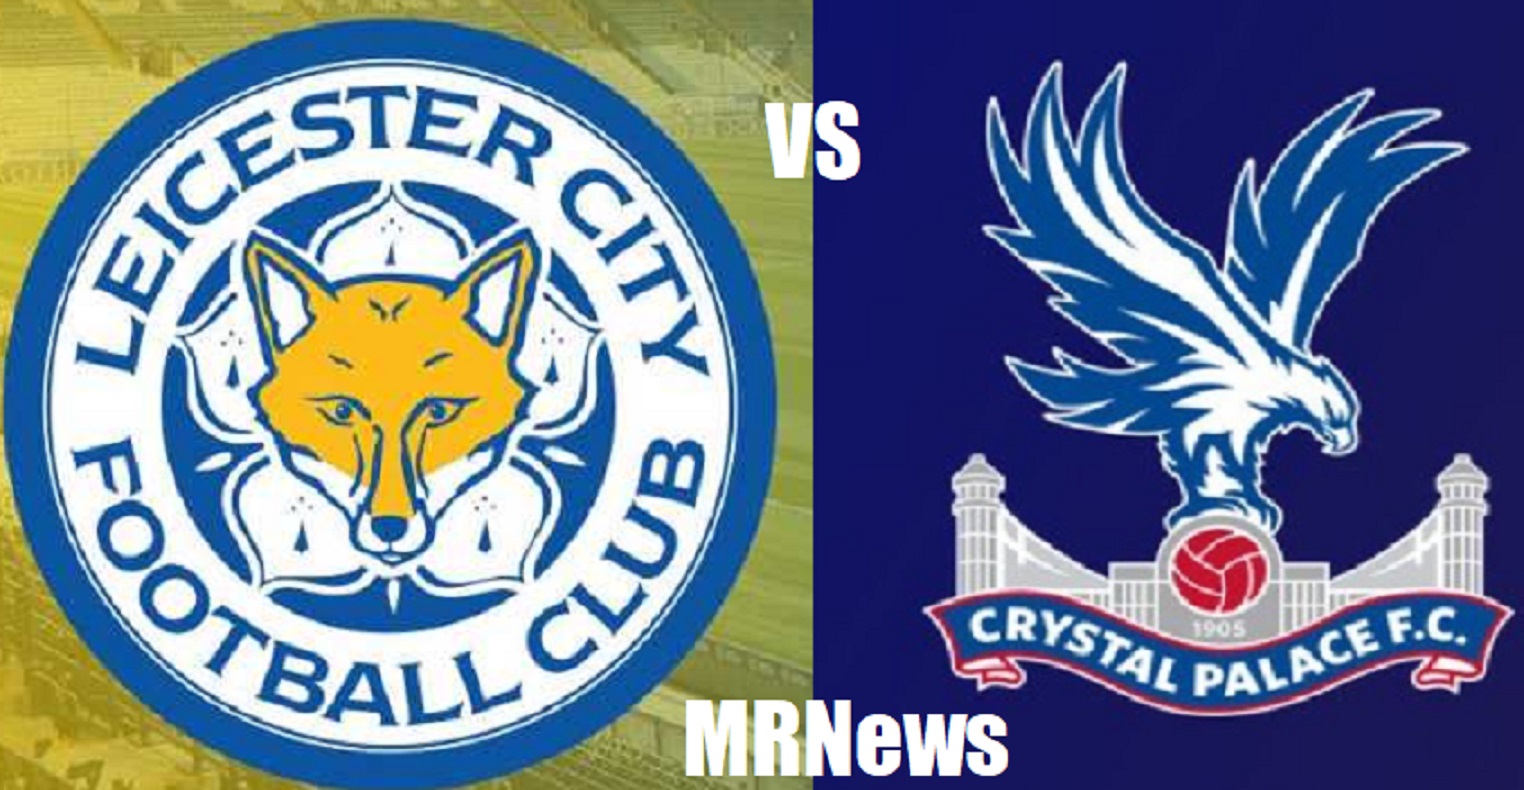 Leicester x Crystal Palace MRNews